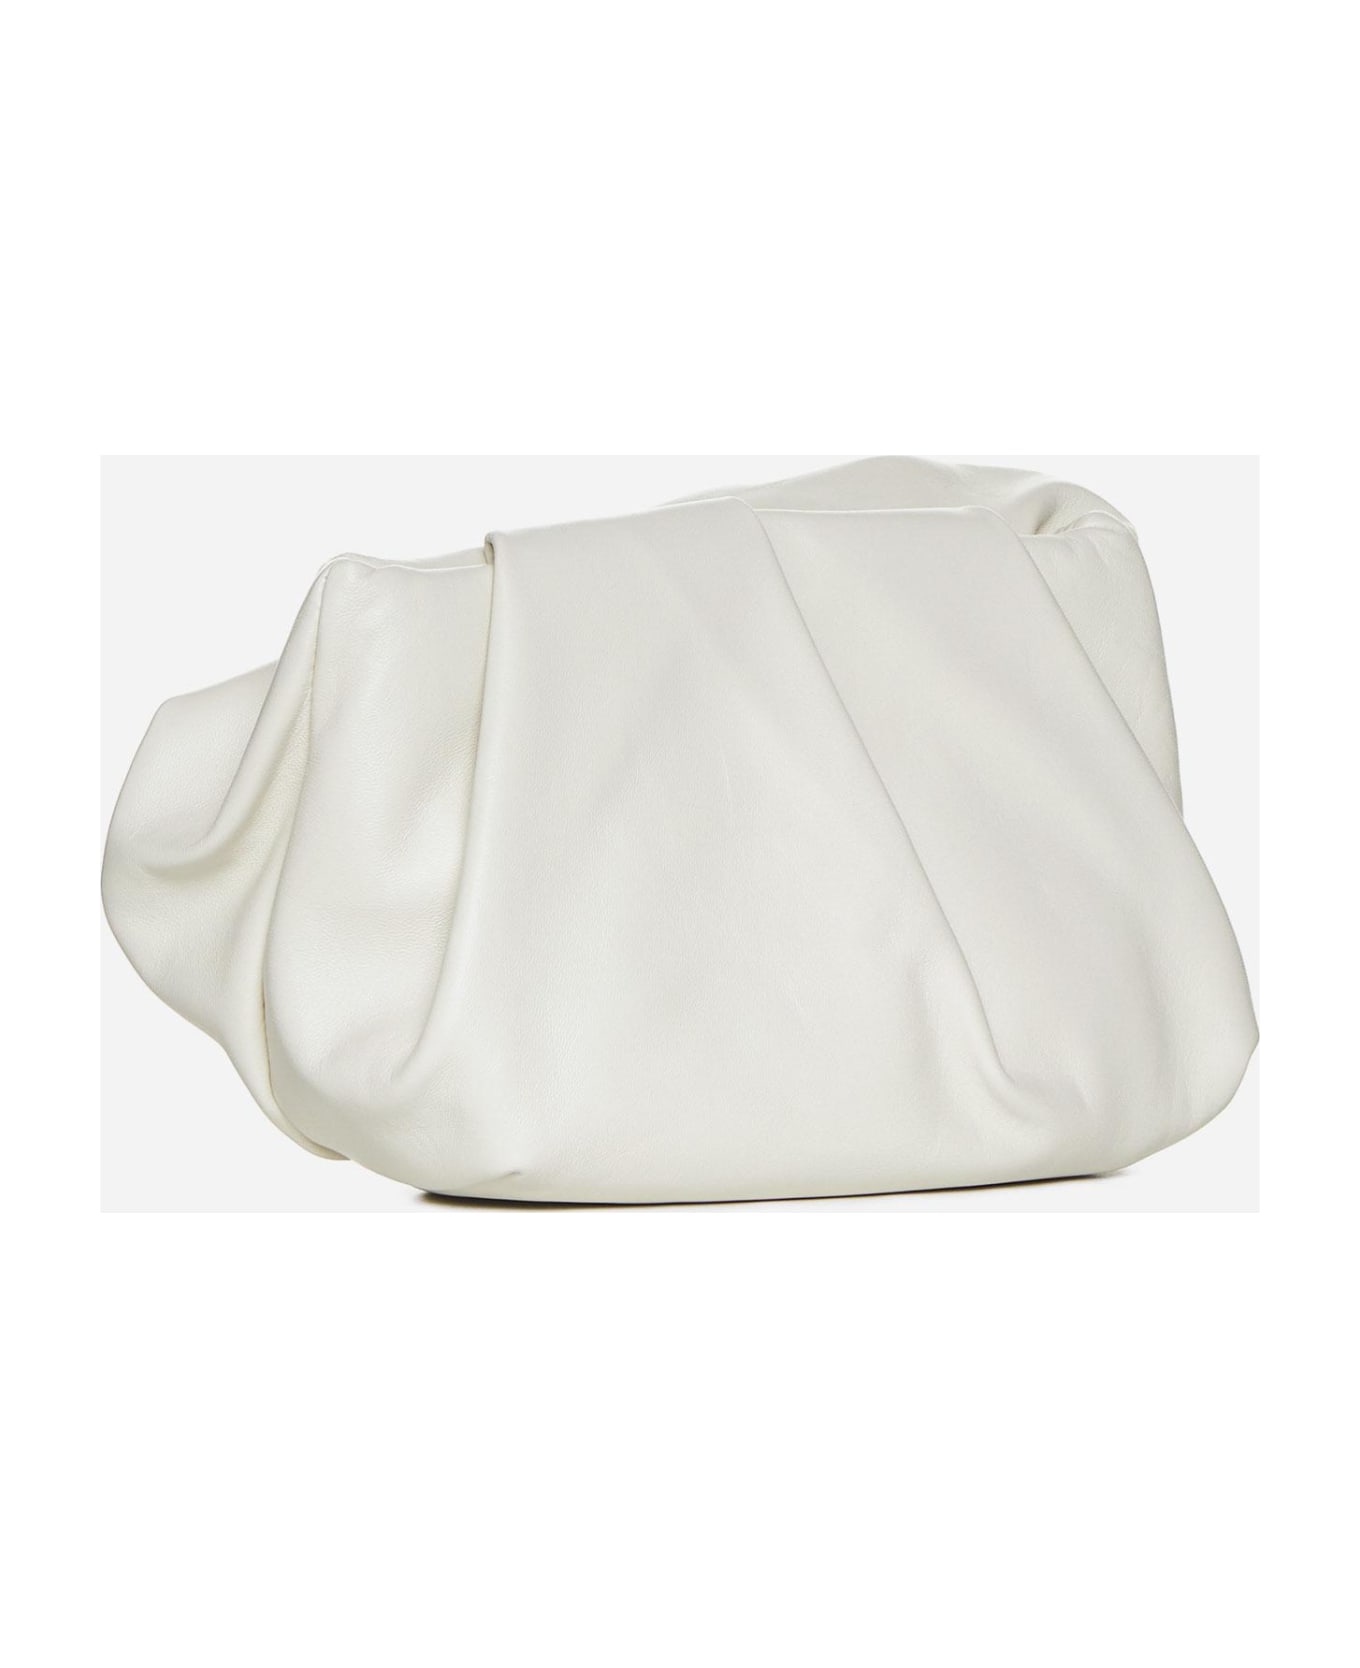 Burberry Rose Nappa Leather Clutch Bag - Ivory トートバッグ